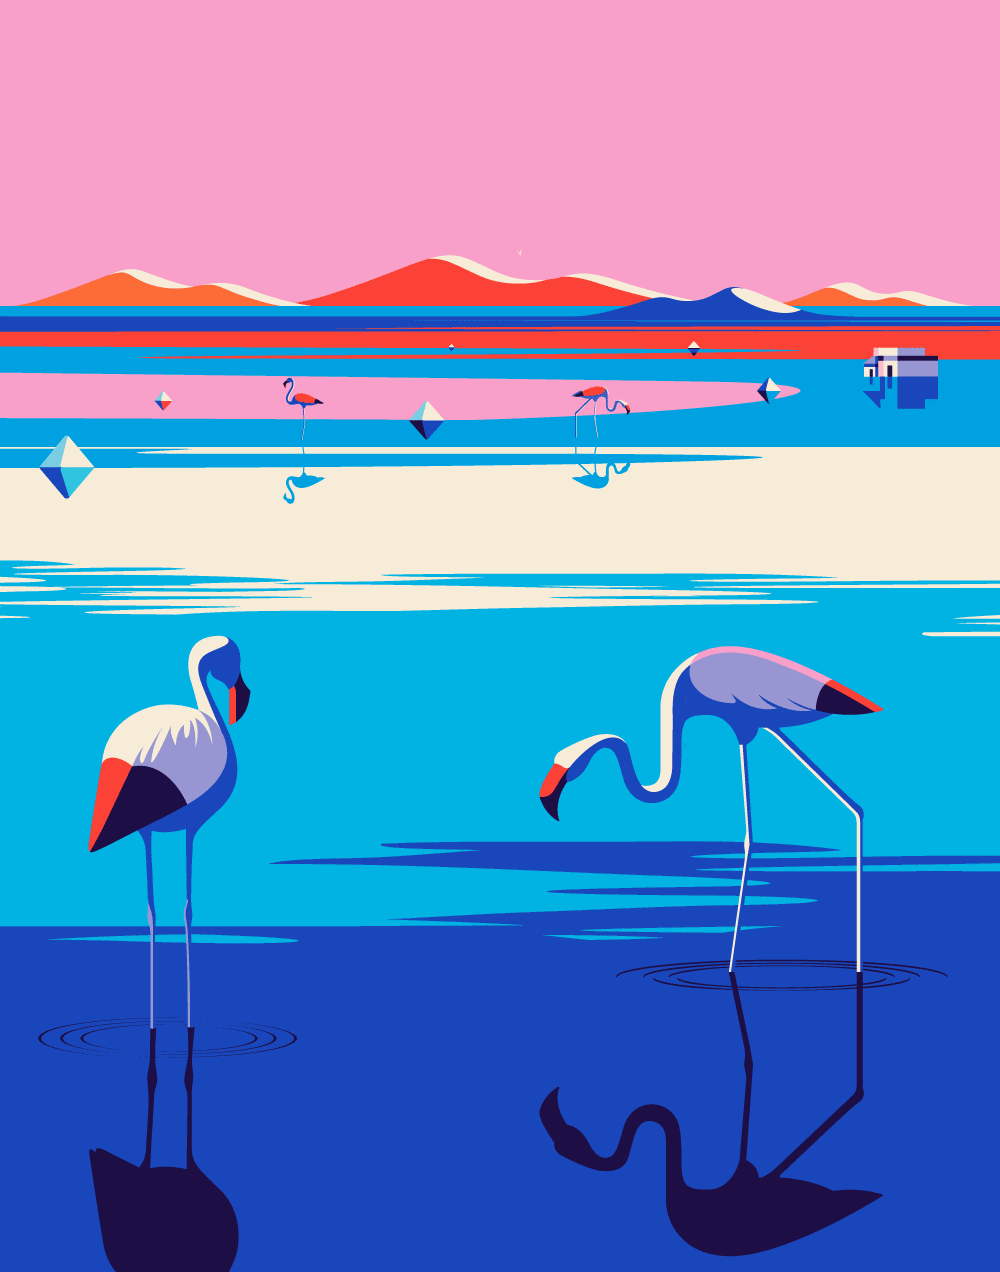 An illustration of flamingos in the water.